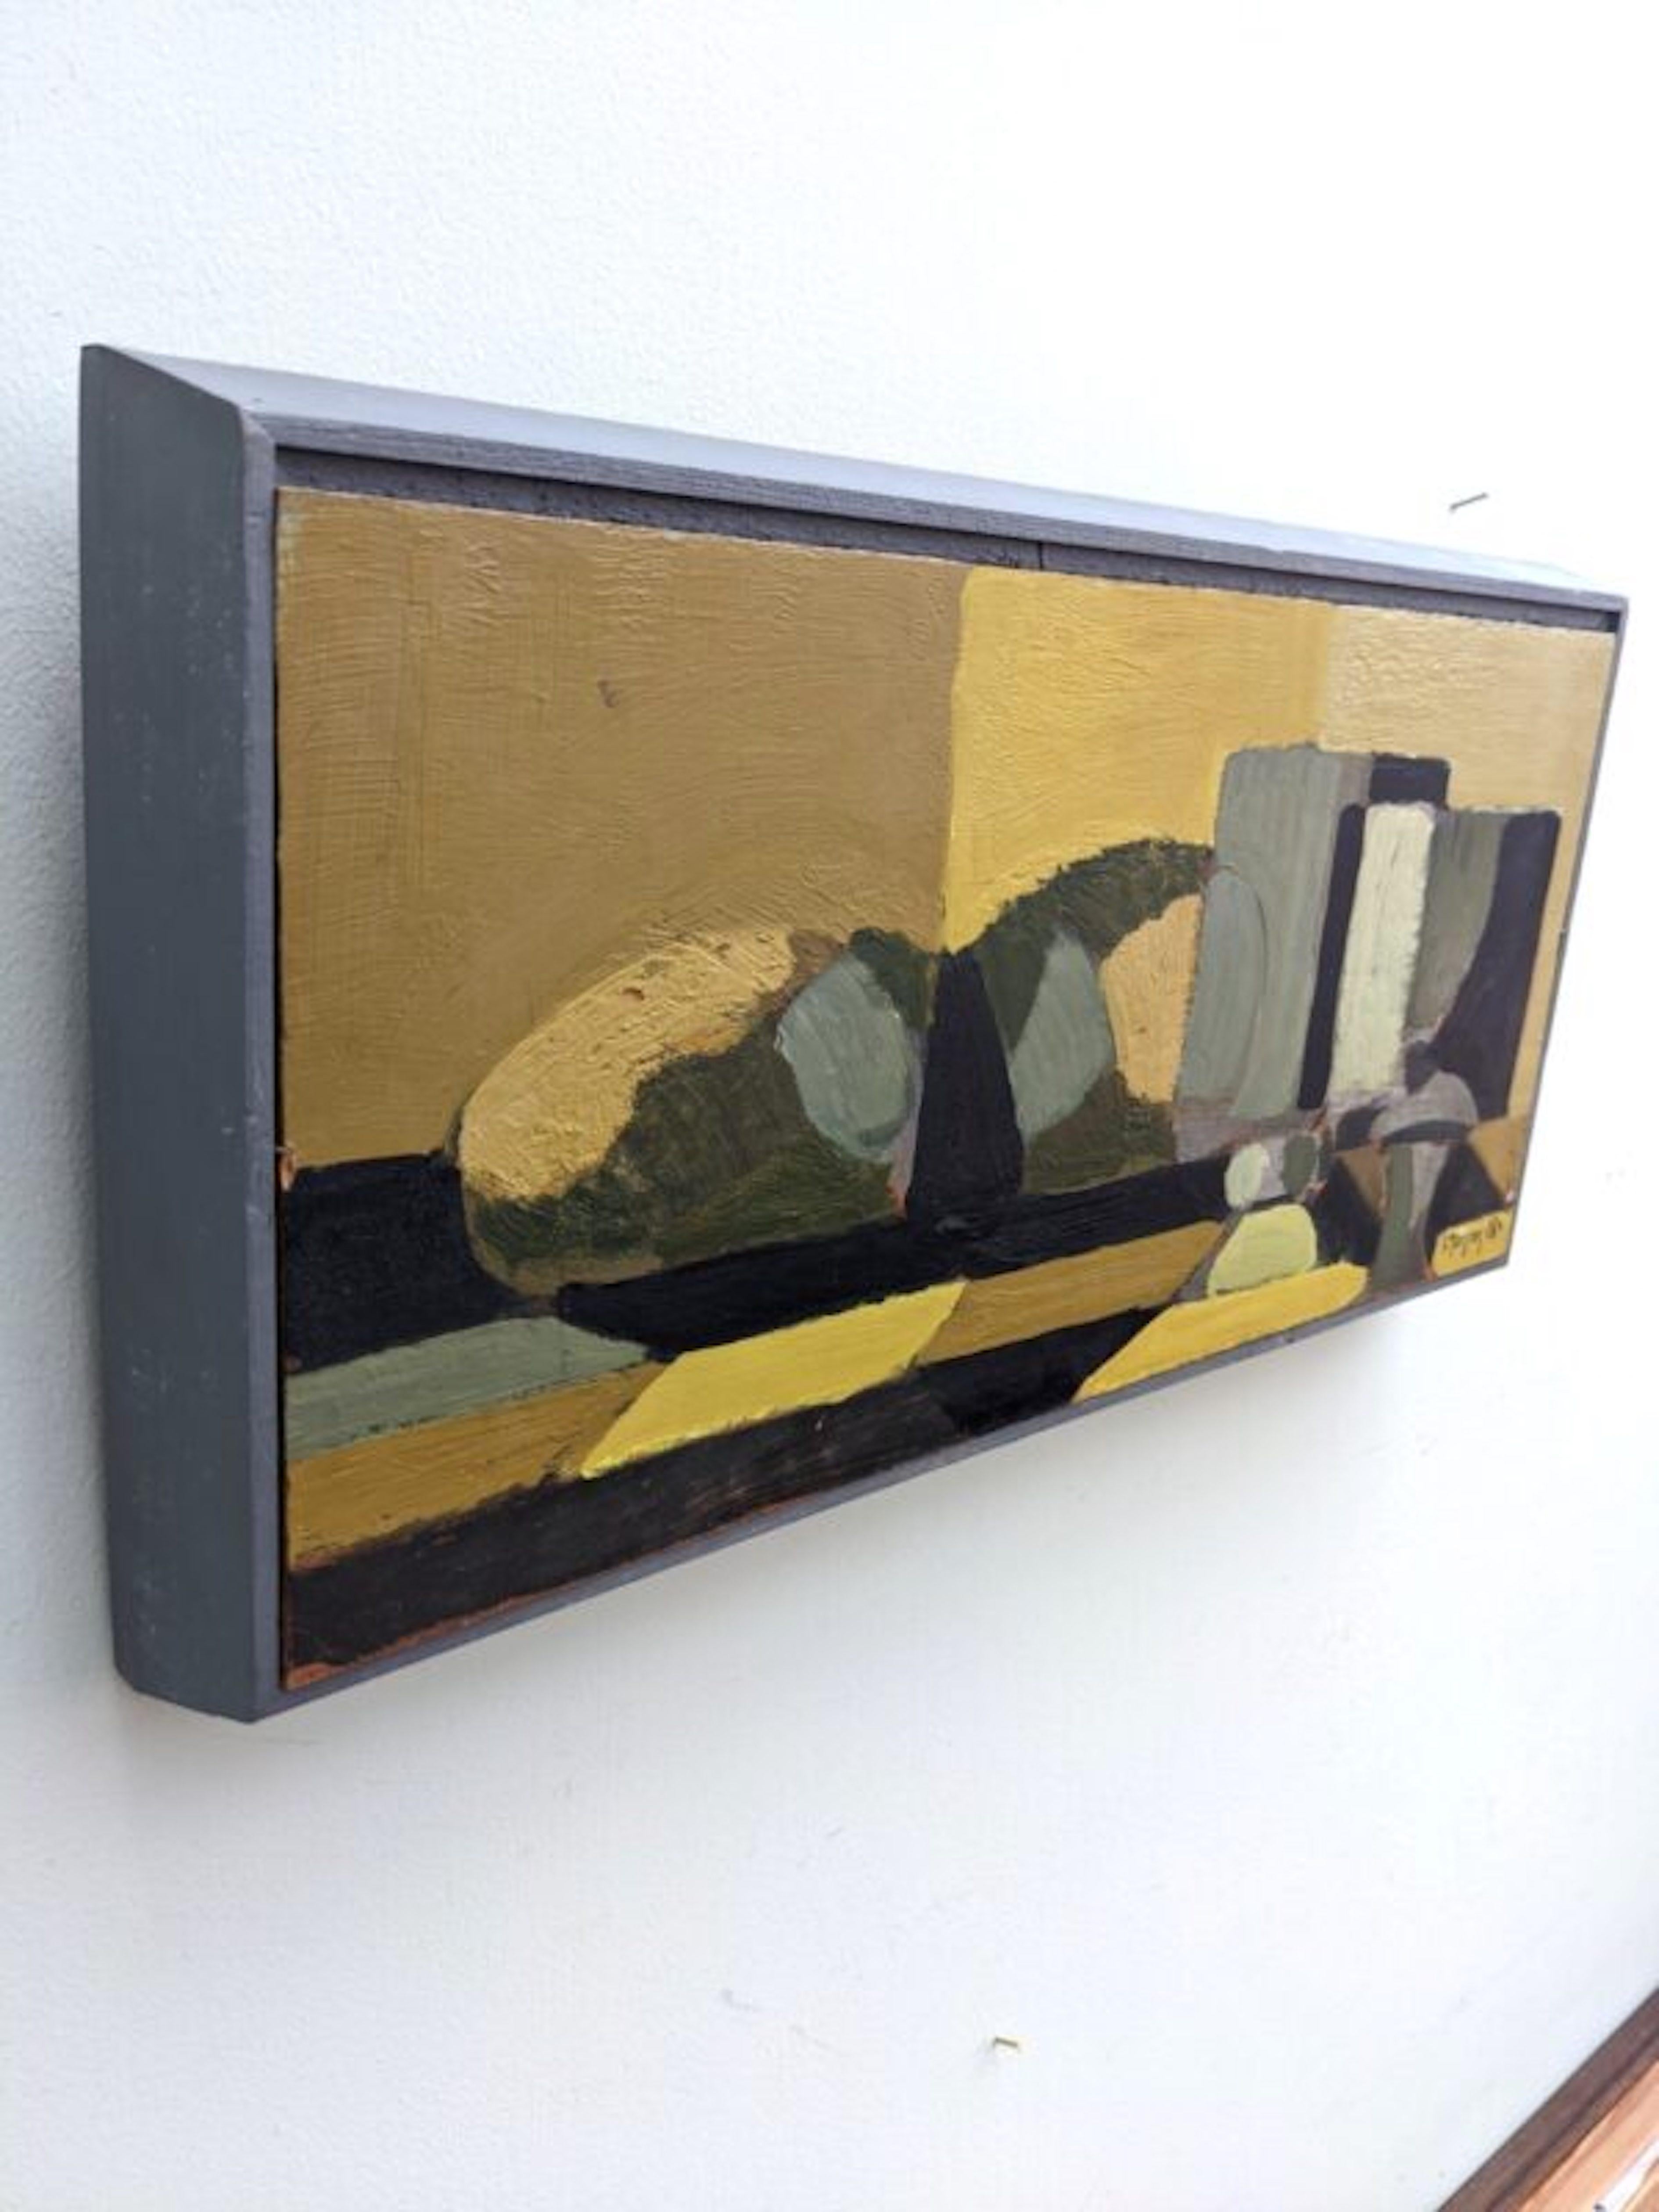 BLACK & YELLOW
Size: 24 x 46.5 cm (including frame)
Oil on Board

A small but brilliantly executed mid century abstract still life in oil, by Swedish artist Ivar Morsing, painted in 1956. A bold and vivid palette of black, yellow and green give this